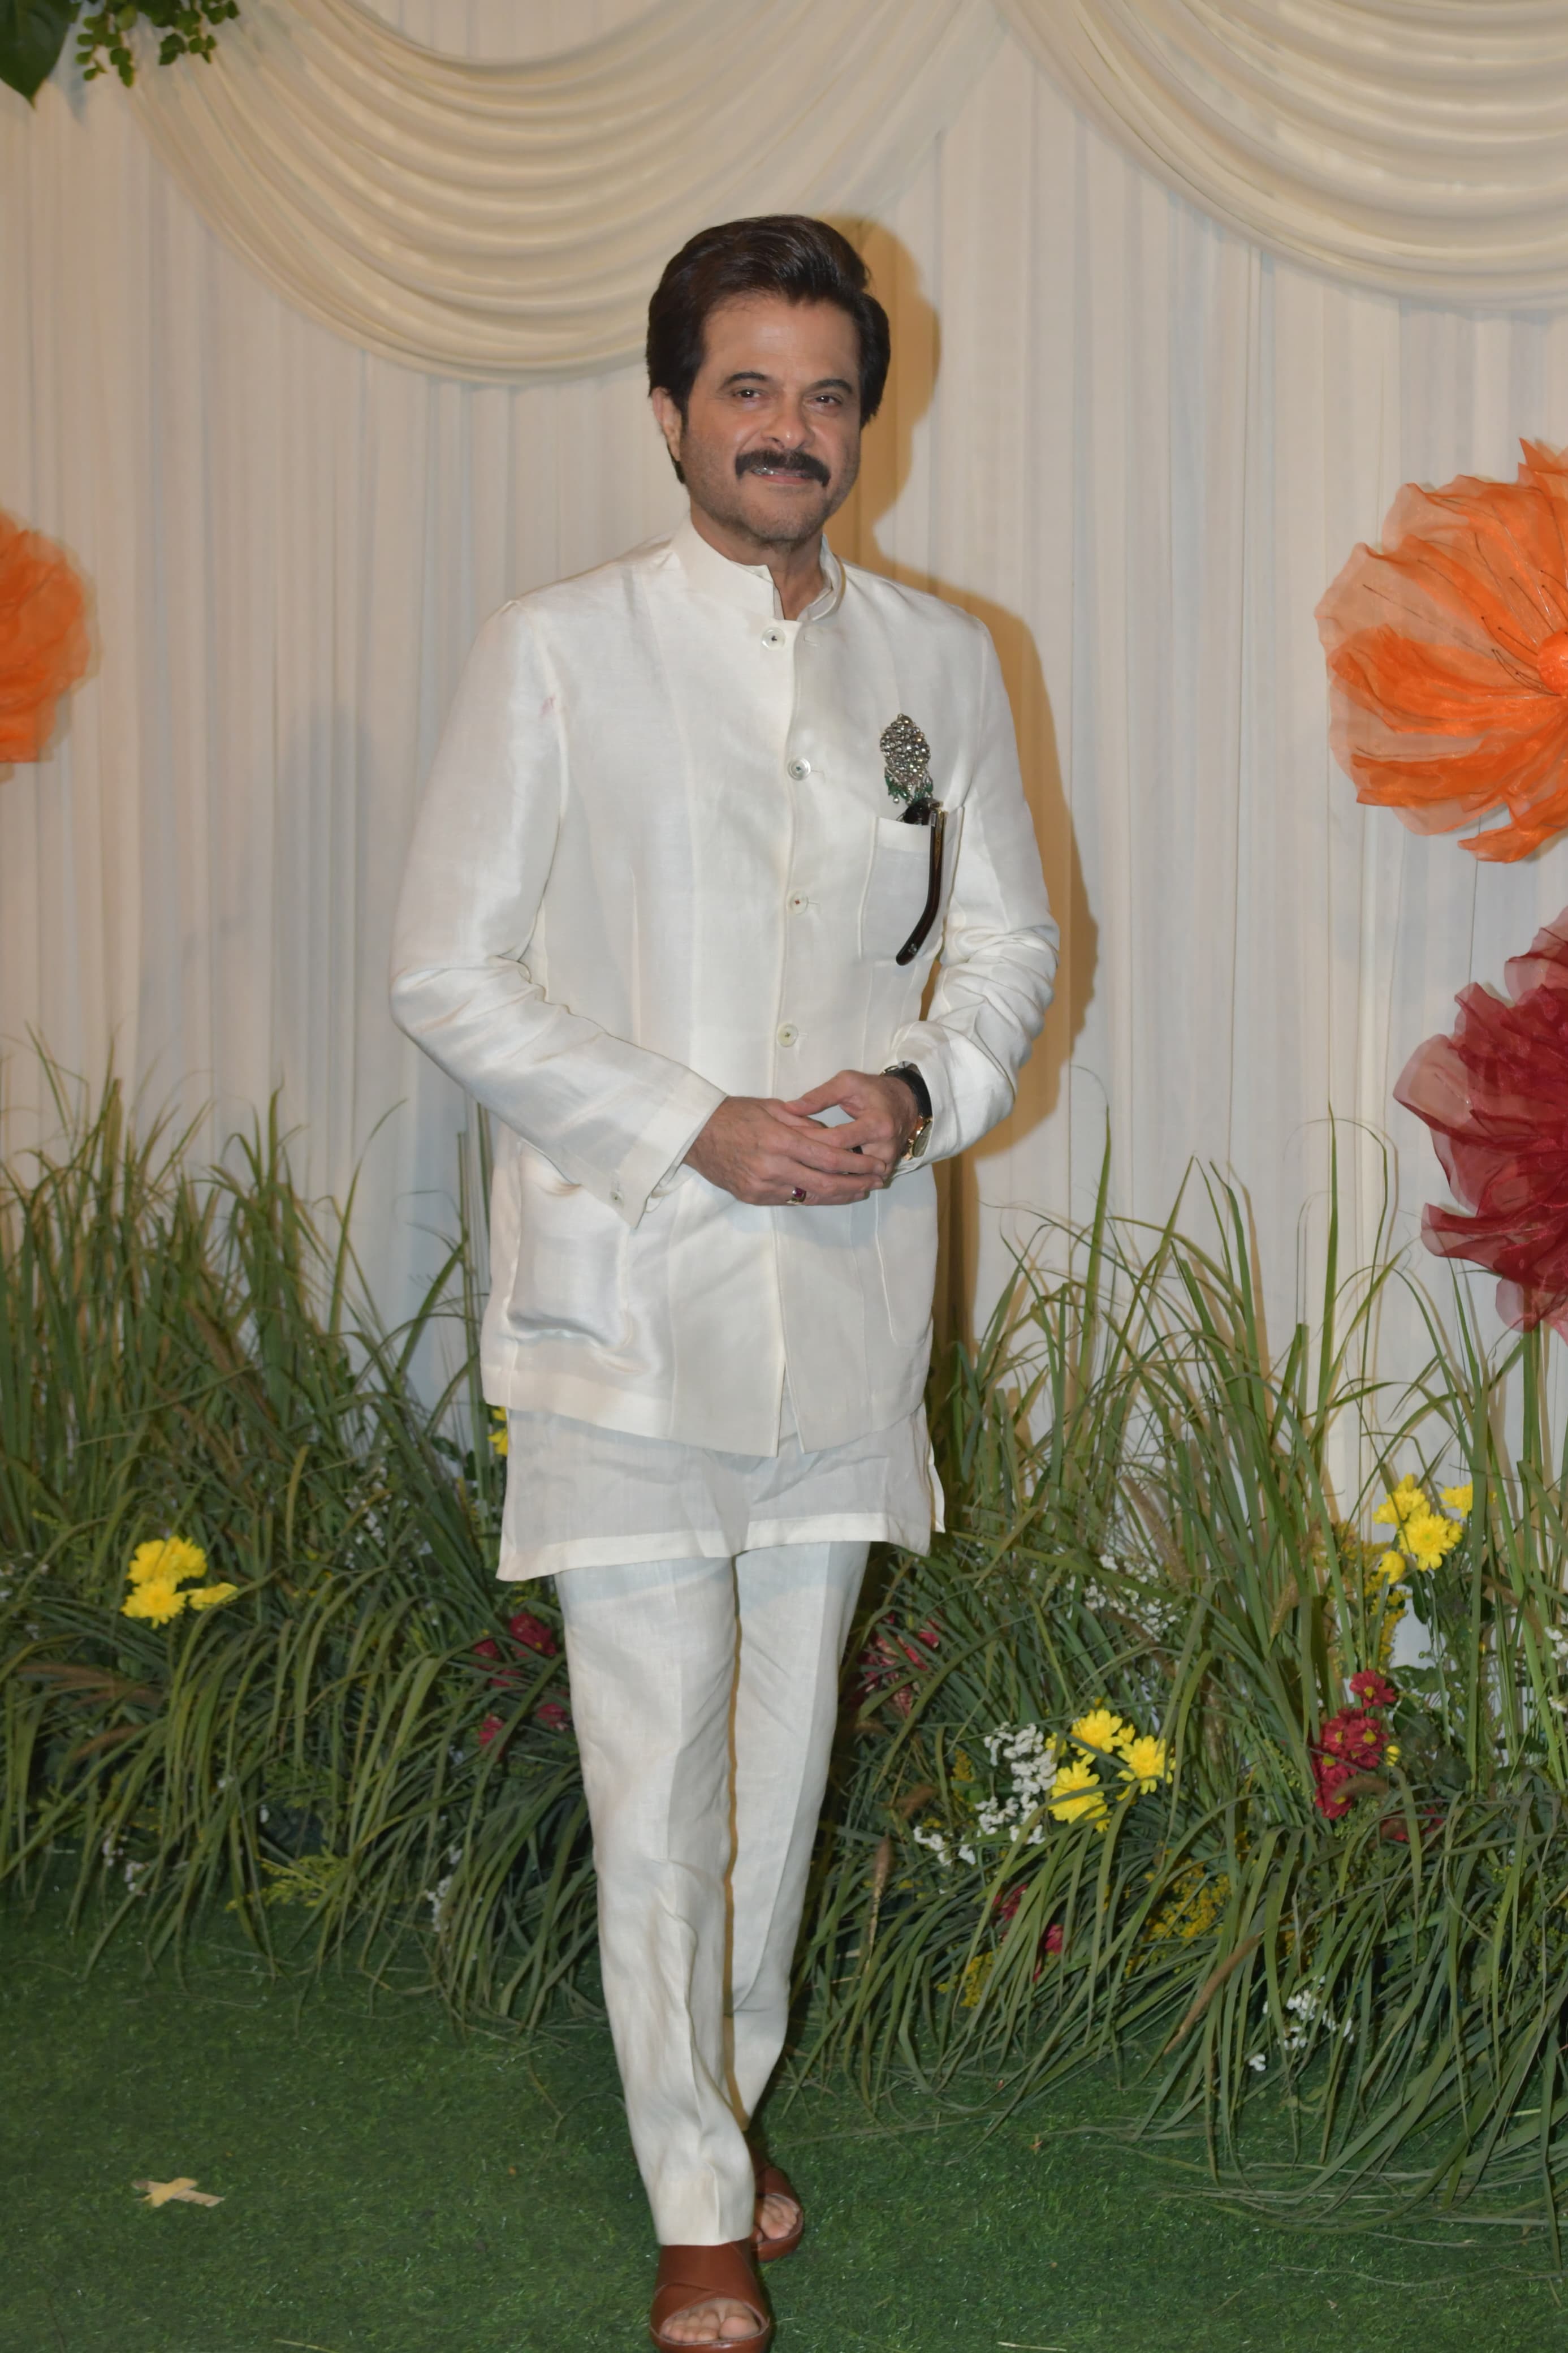 Anil Kapoor never fails to impress us with his style. The veteran actor opted for an all-white traditional attire to ace his look